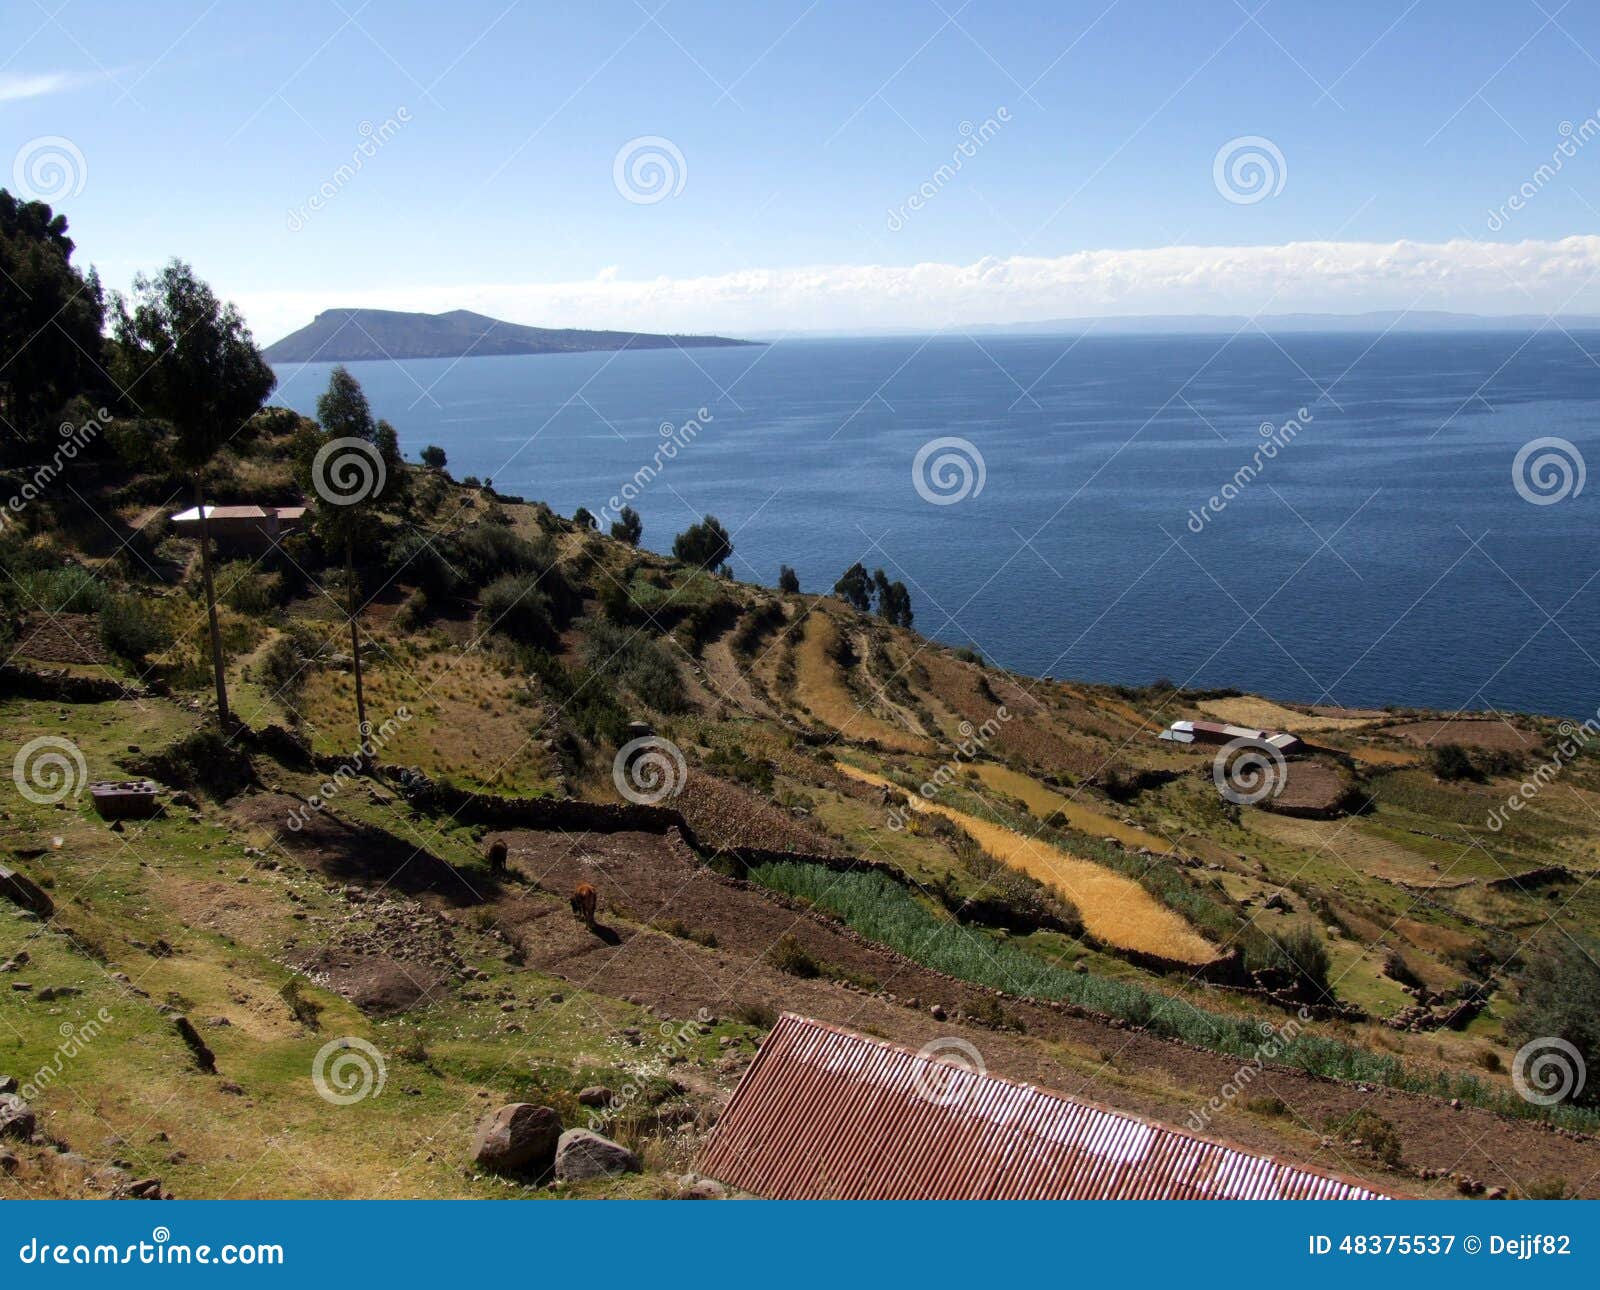 view of the lake titicaca from taquile island